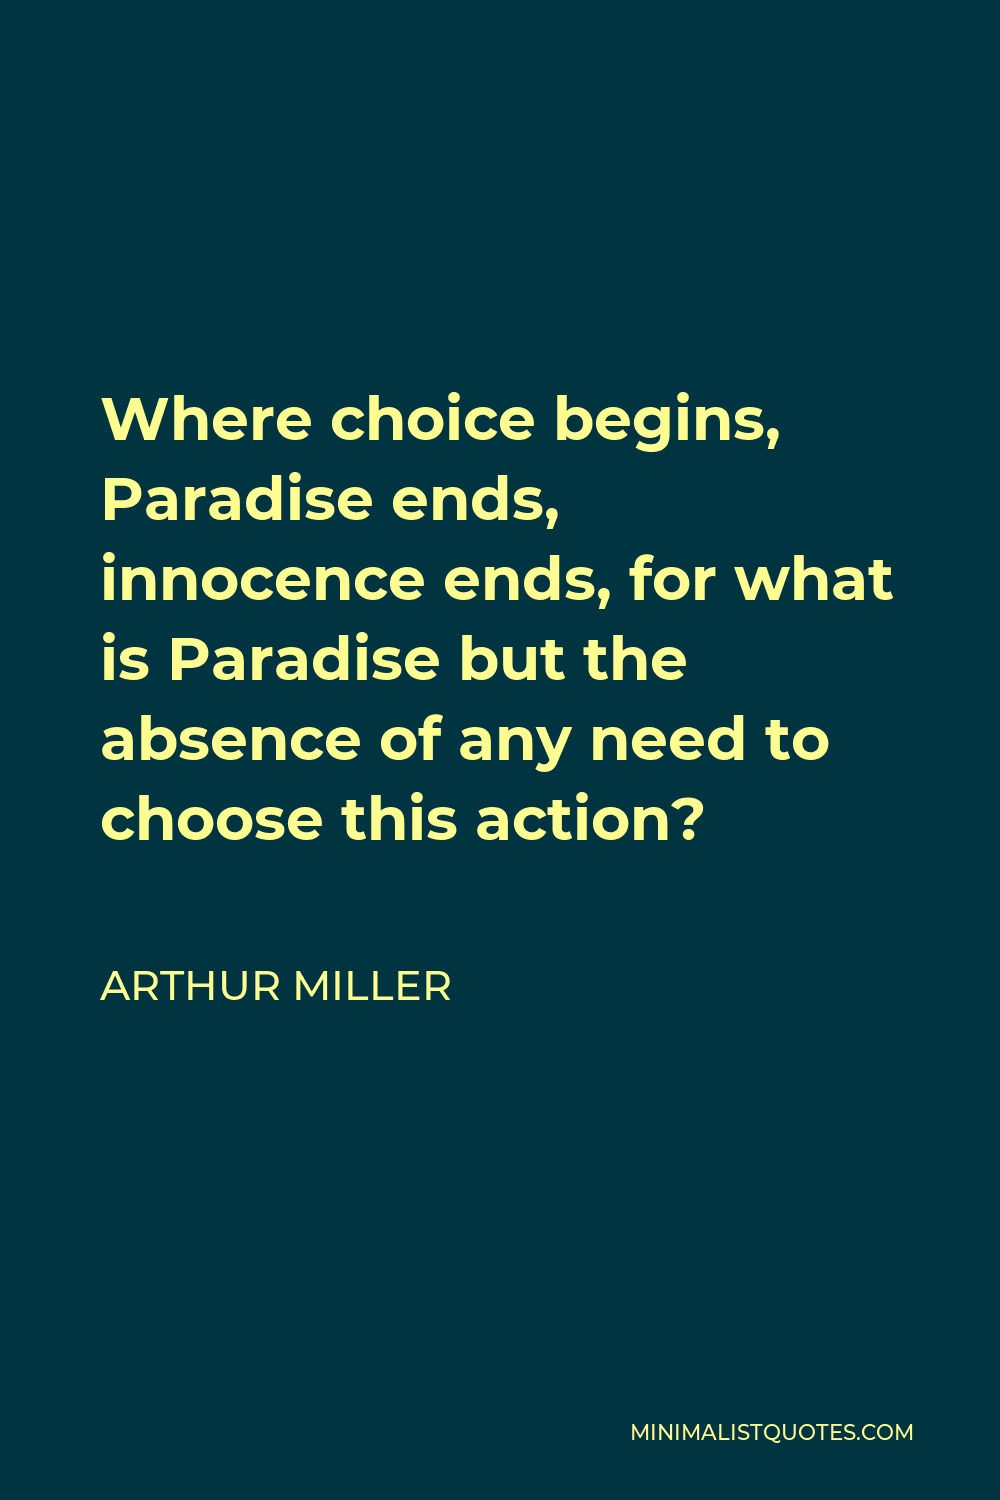 Arthur Miller Quote - Where choice begins, Paradise ends, innocence ends, for what is Paradise but the absence of any need to choose this action?